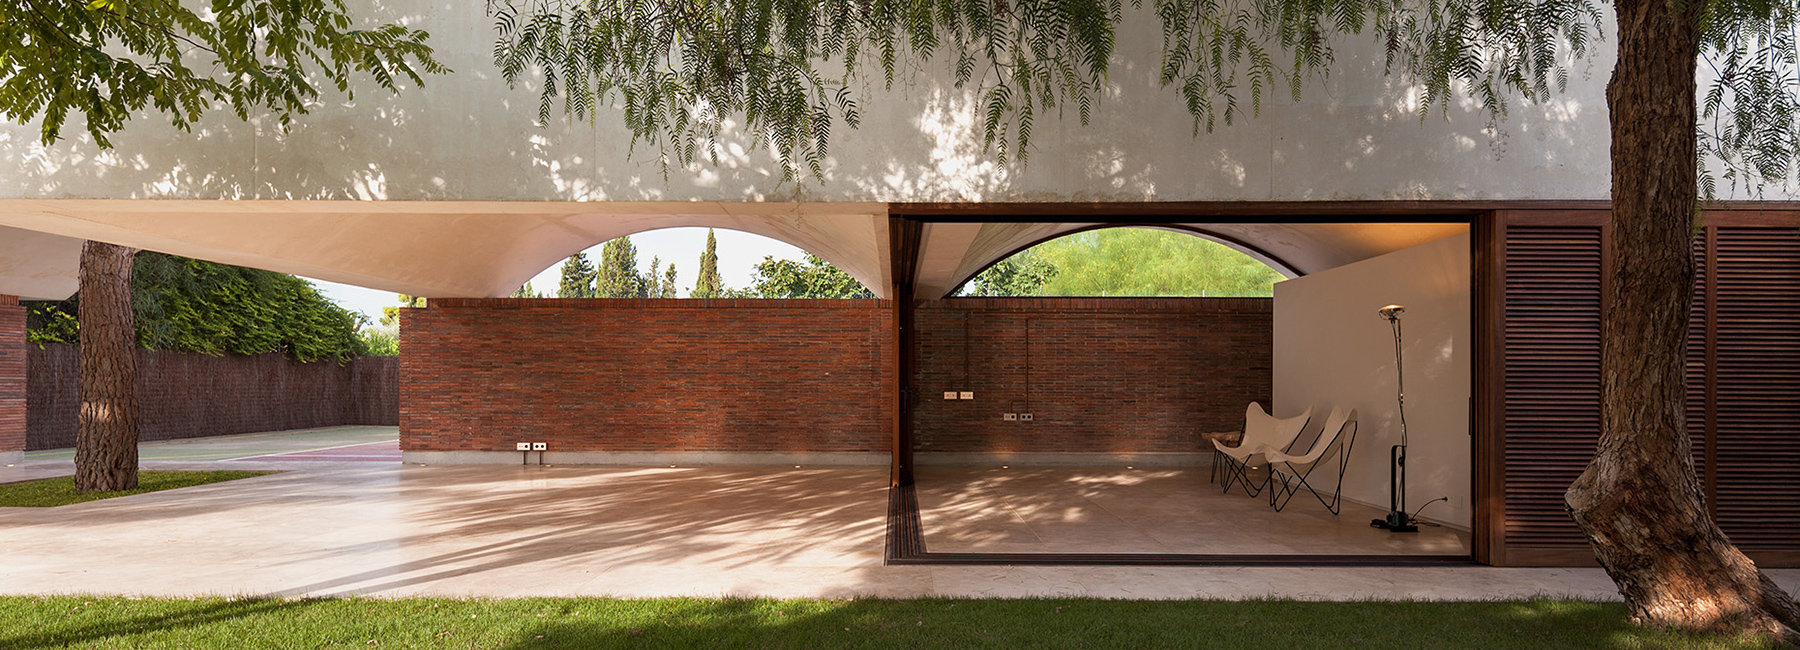 mesura extends a home in rural spain with vaulted brick pavilion casa IV